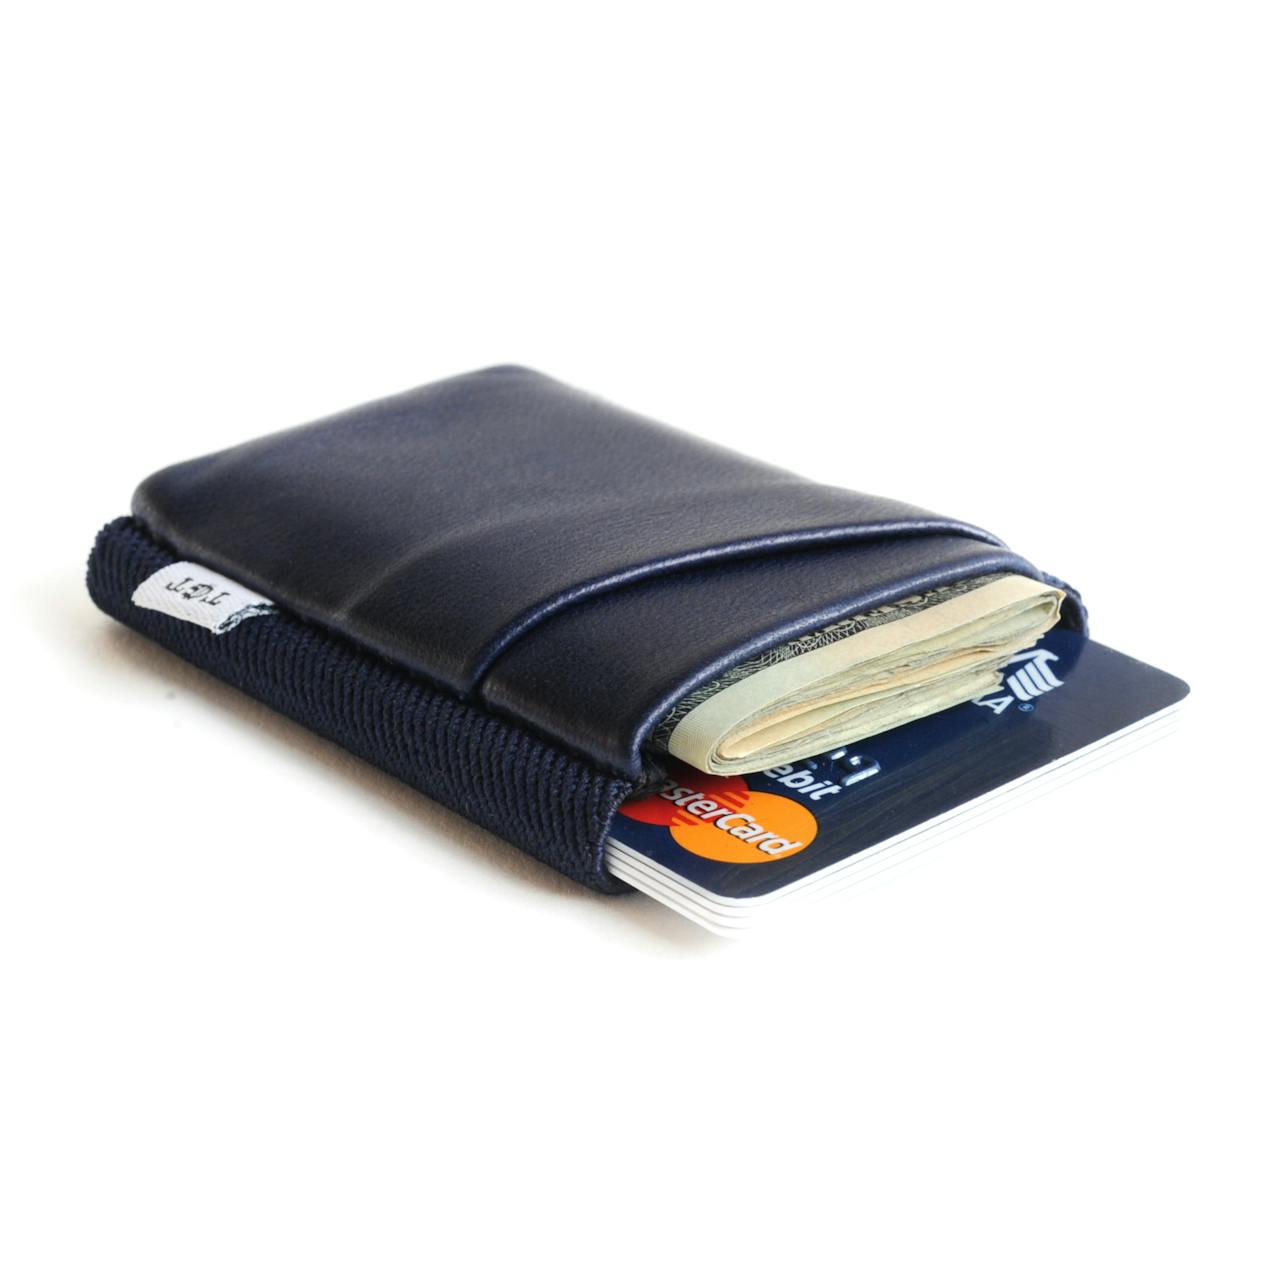 Tight Wallets Clinton Hill Deluxe